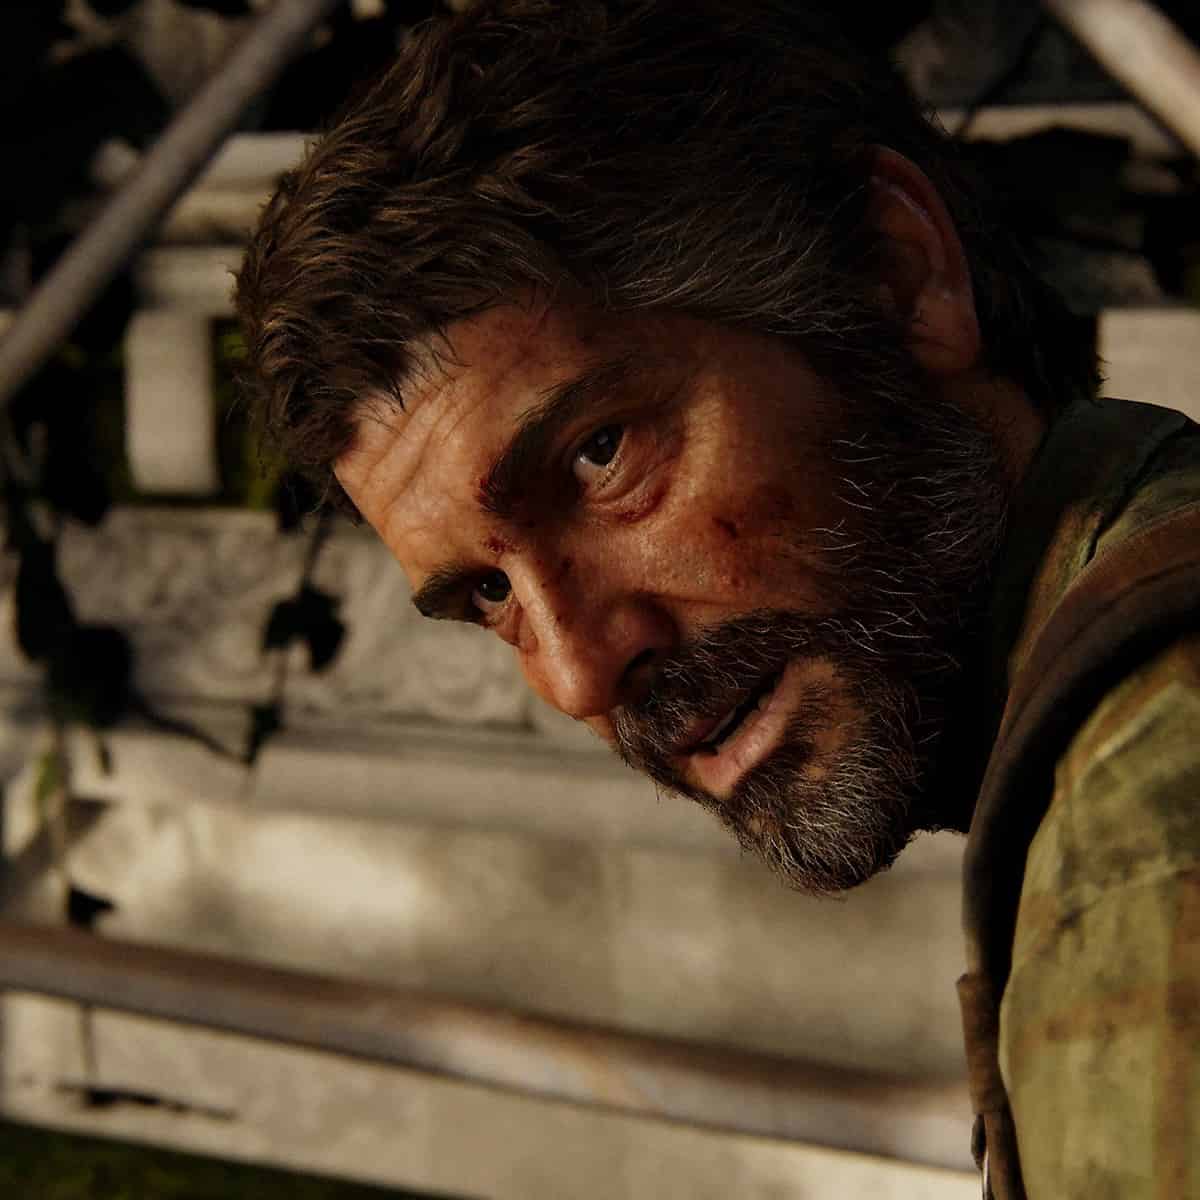 The Last of Us Part 1 PC patch notes